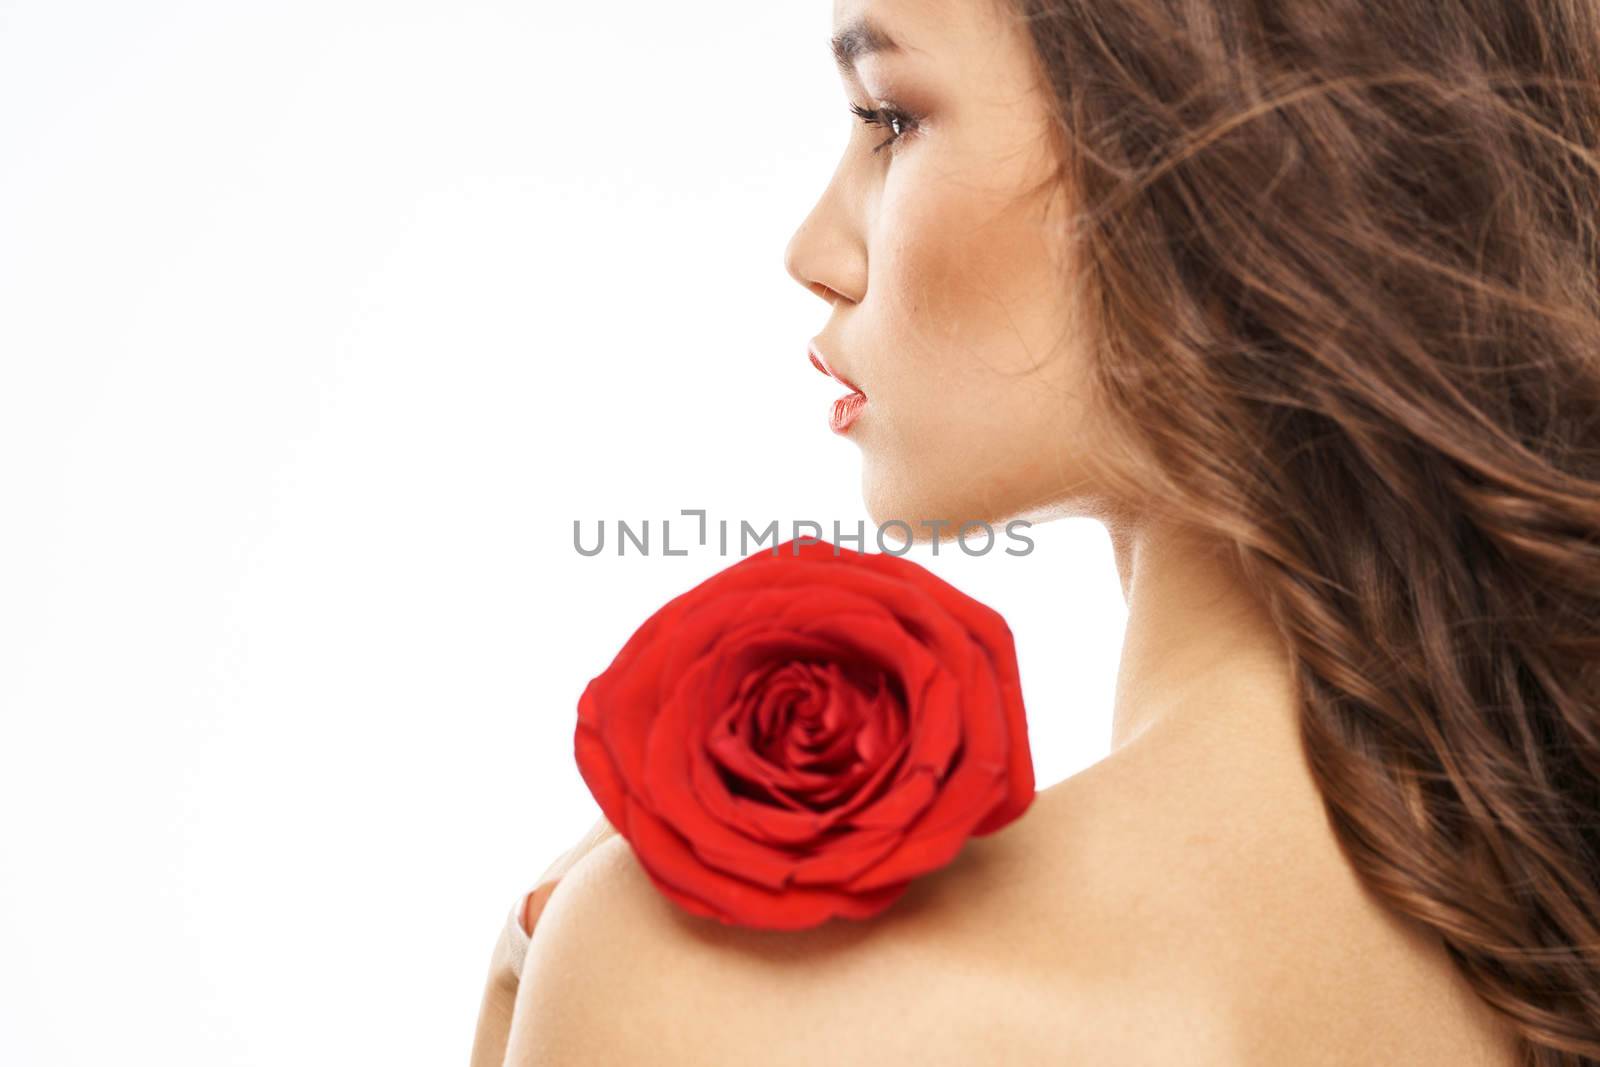 Woman with naked shoulders and red rose evening makeup light background. High quality photo